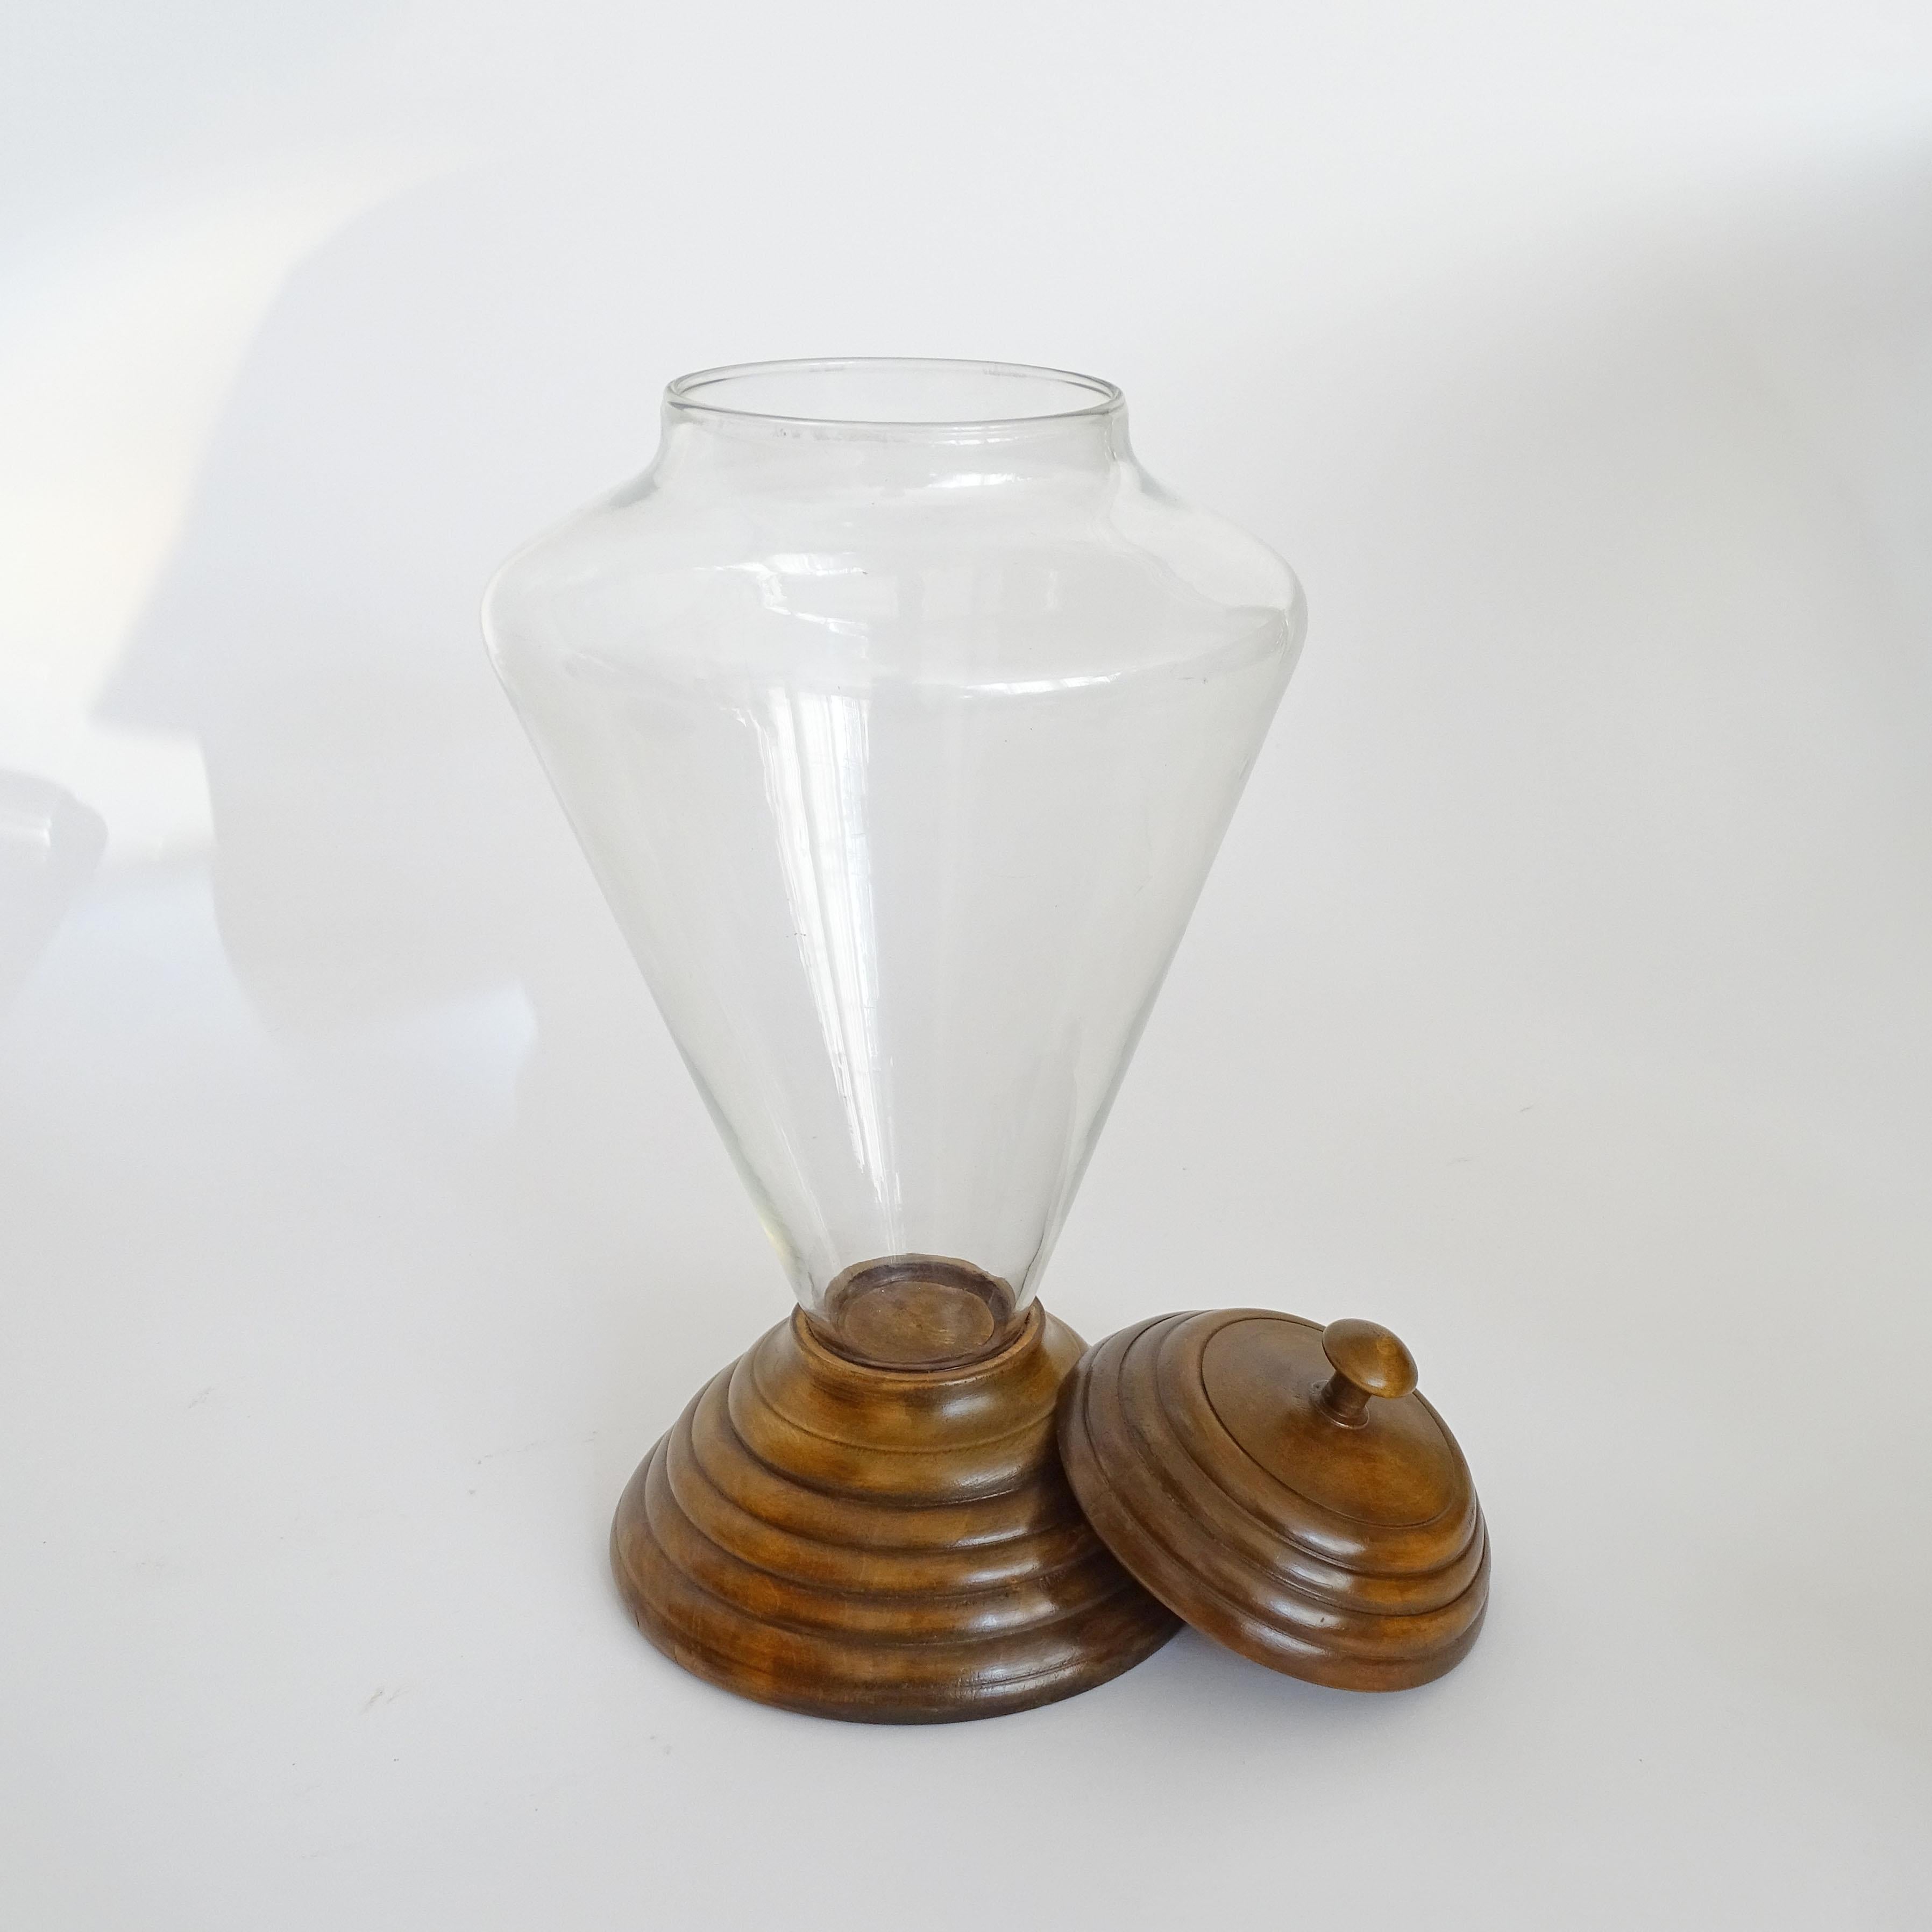 Italian Art Deco Candy Jars in Glass and Wood, 1930s For Sale 1